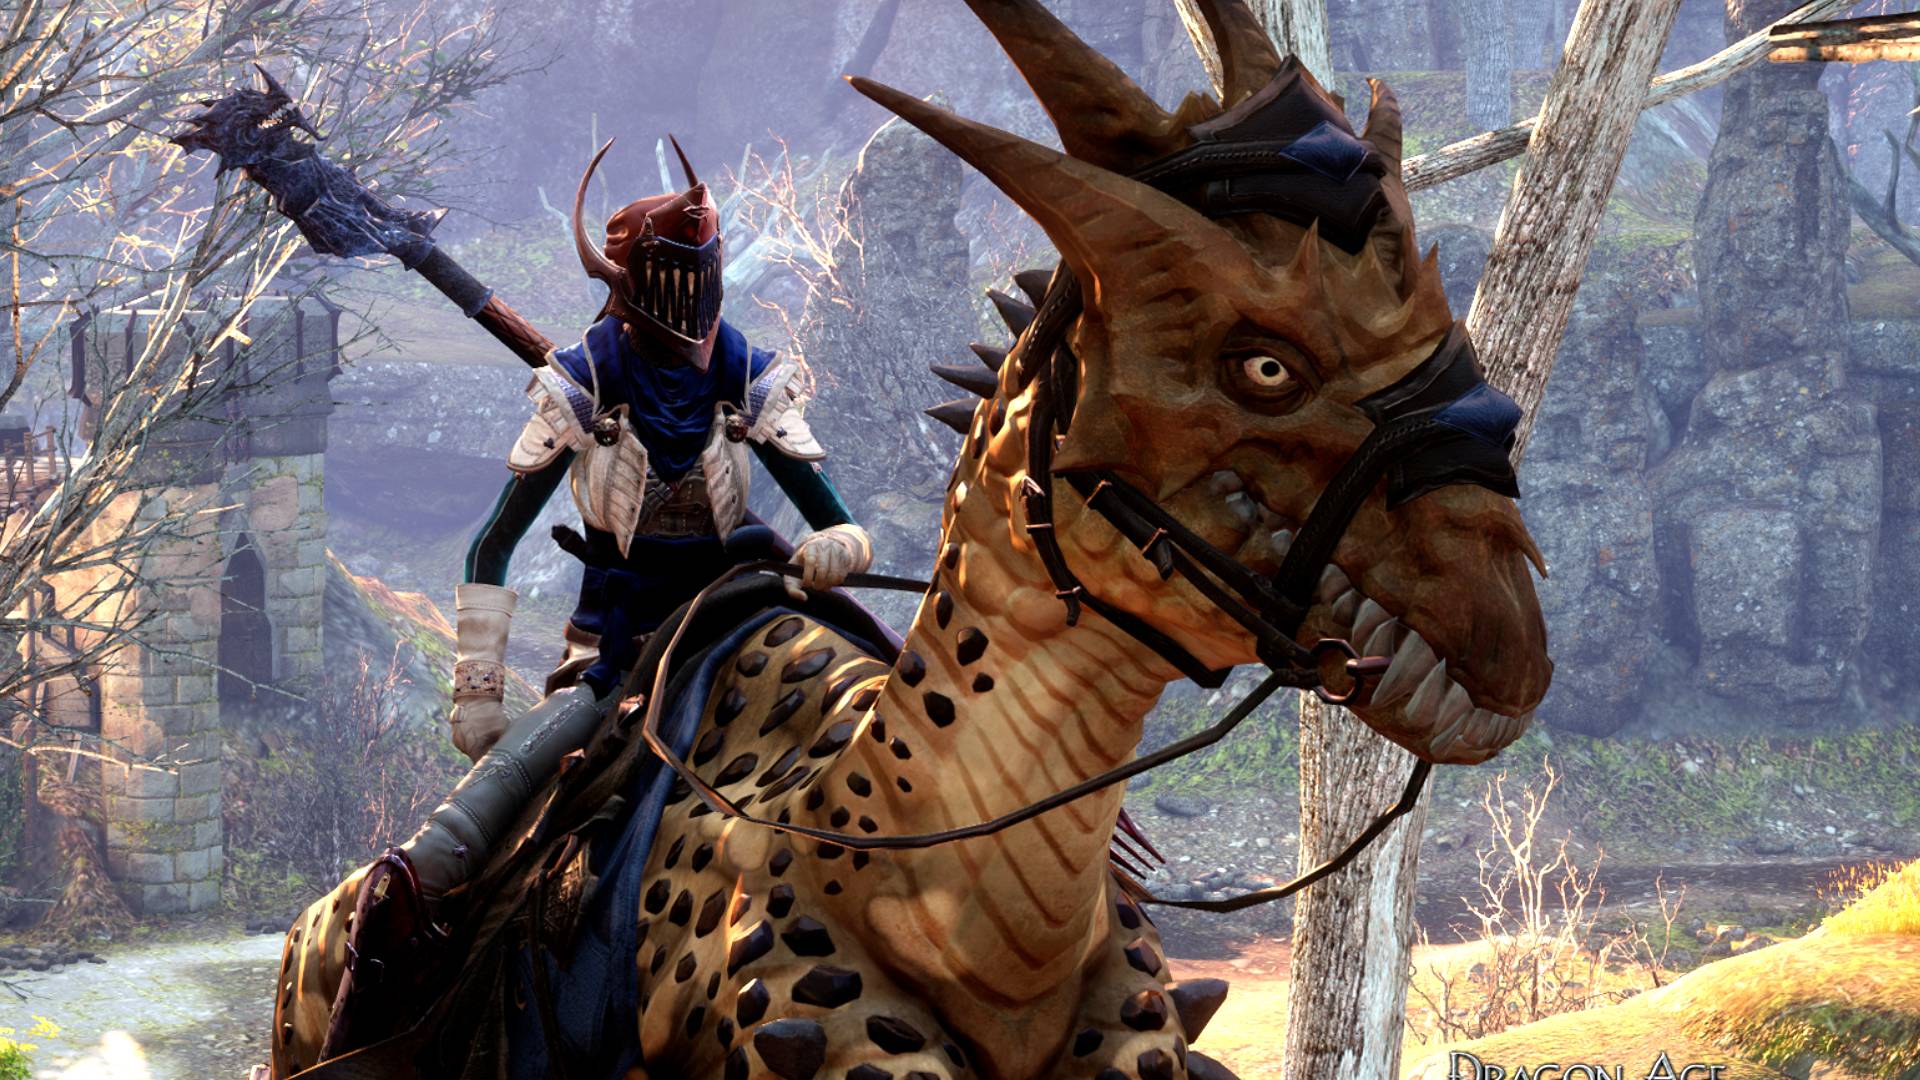 The horses in Dragon Age were lying to you